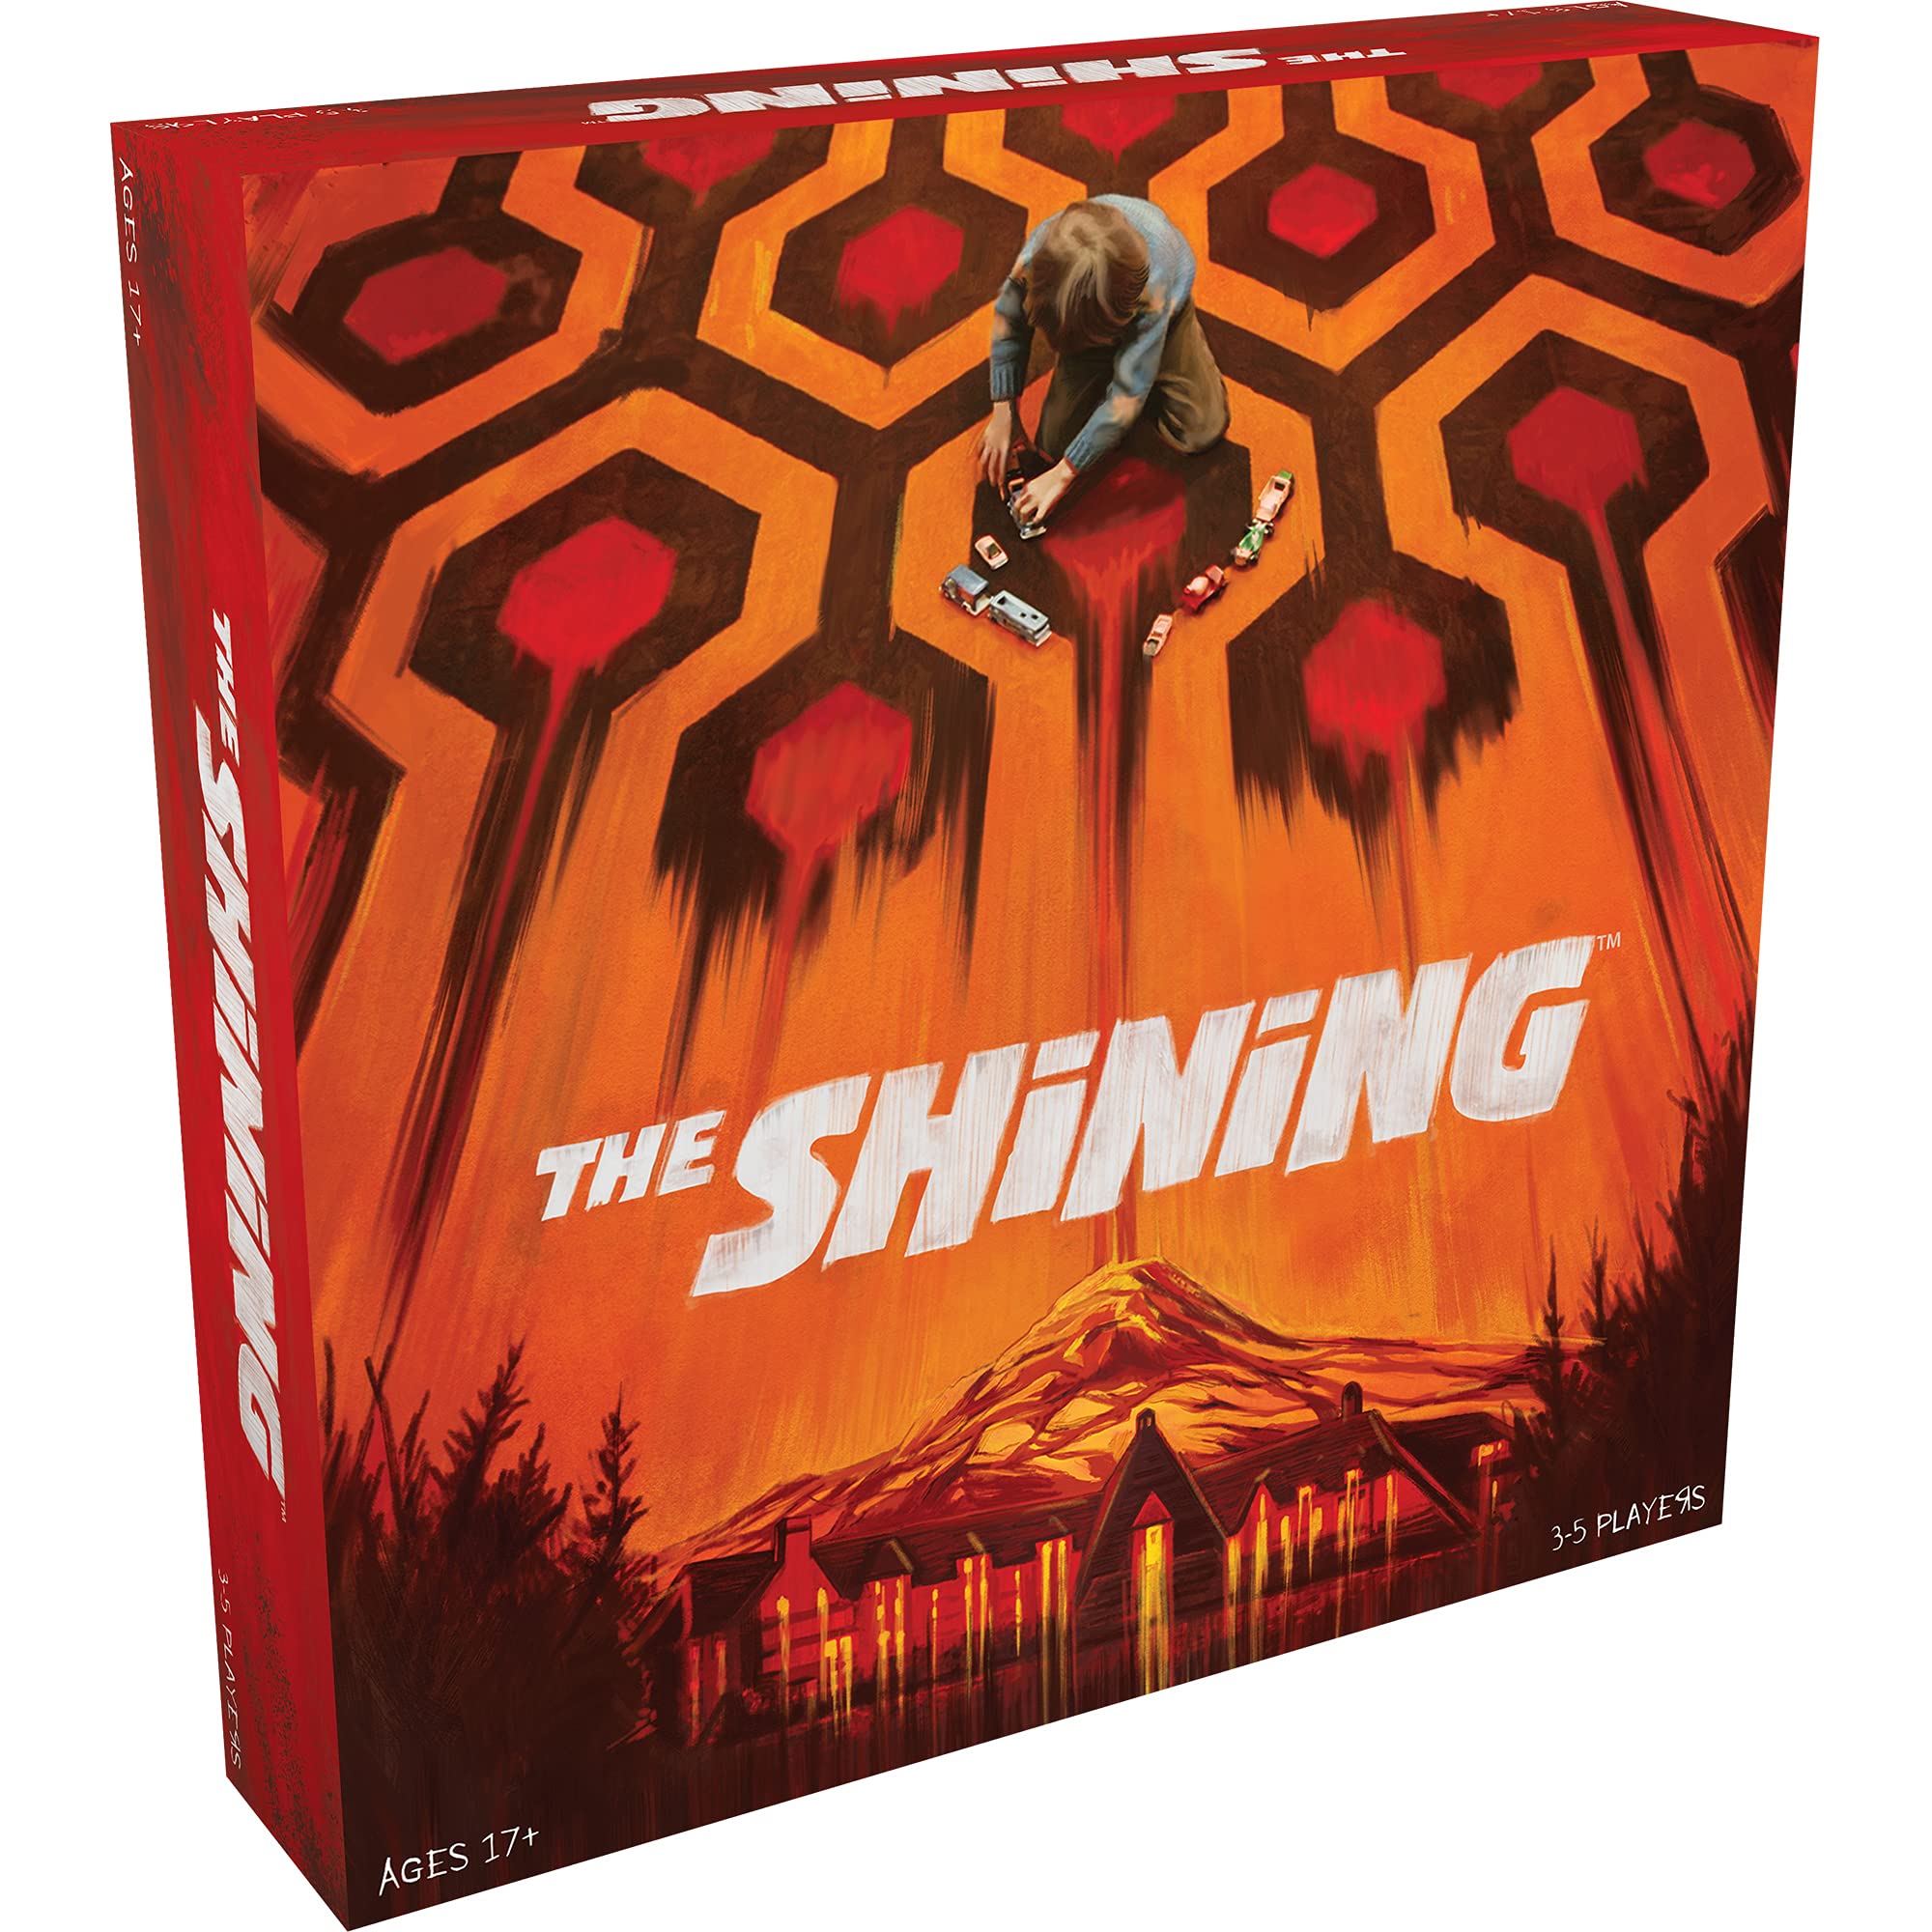 The Shining Horror Game: A Riveting Board Game Adventure